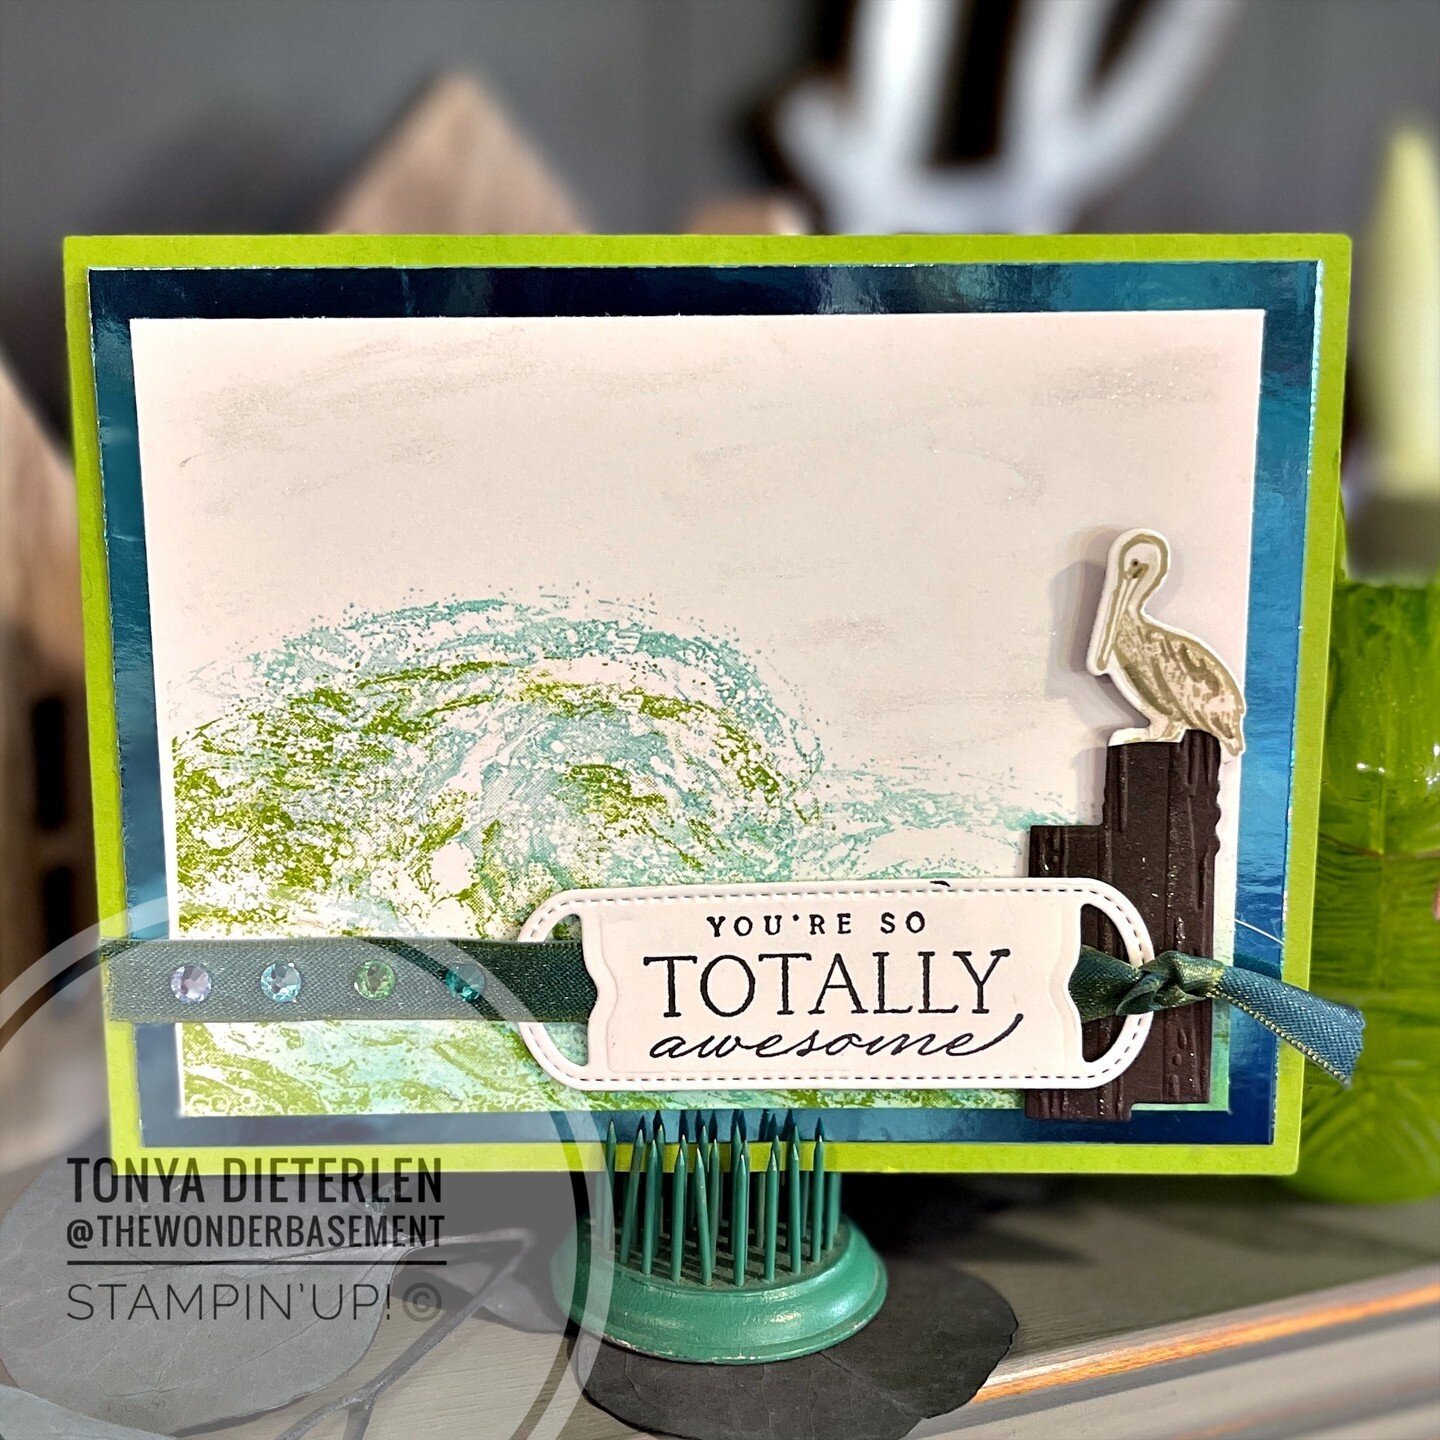 Check out how easy it is to use this stamp set to create a quick card for a beachy-friend!#cardmaking #cards #creatingandsharing #sharewhatyoulove #stampinup #stampinupdemo #